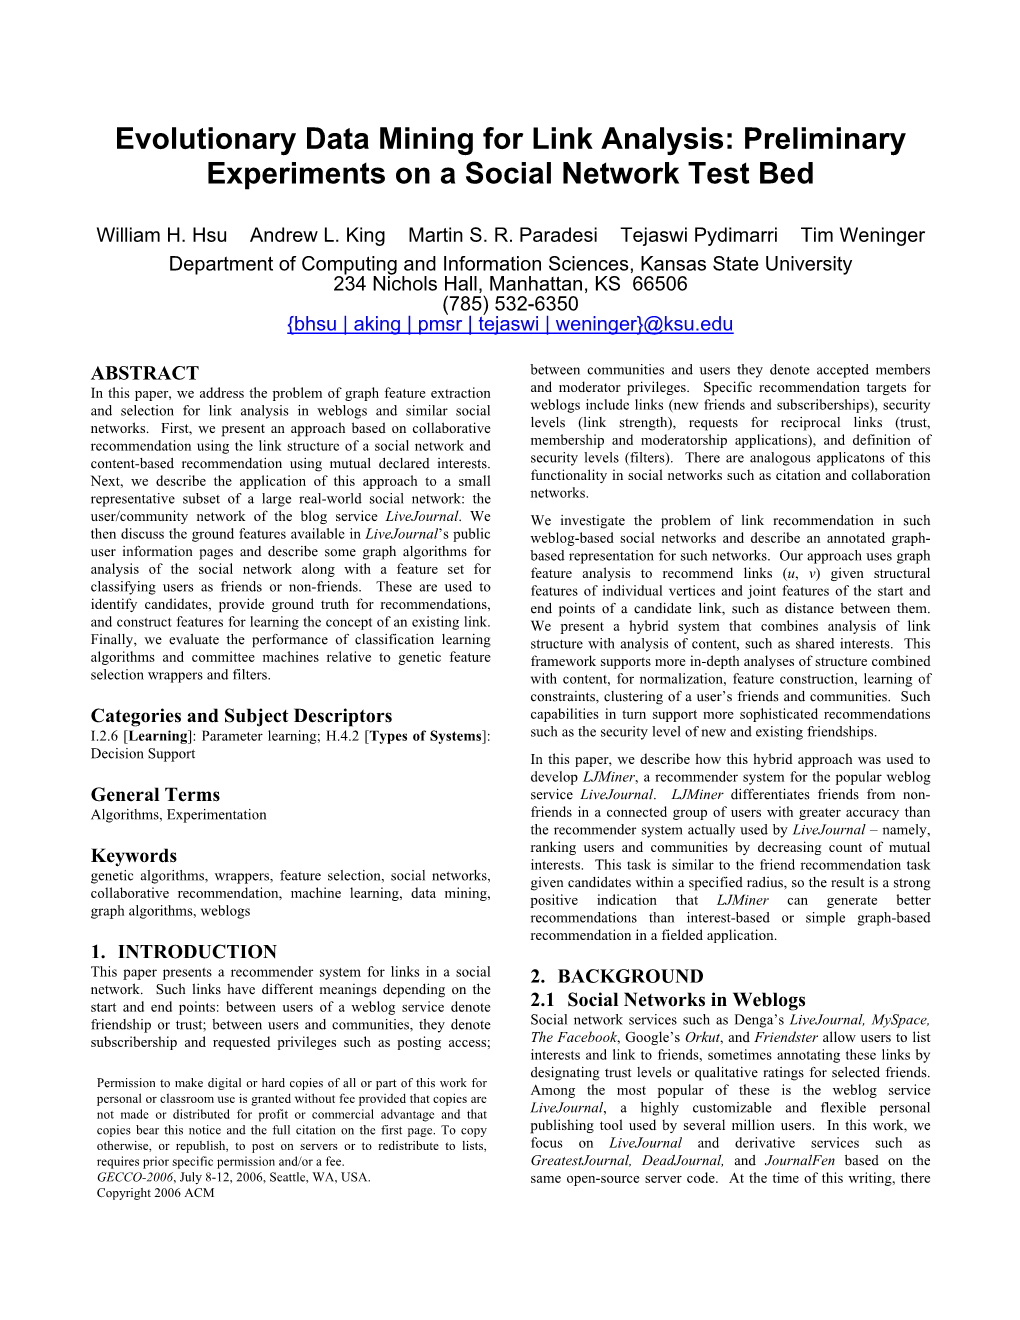 Evolutionary Data Mining for Link Analysis: Preliminary Experiments on a Social Network Test Bed